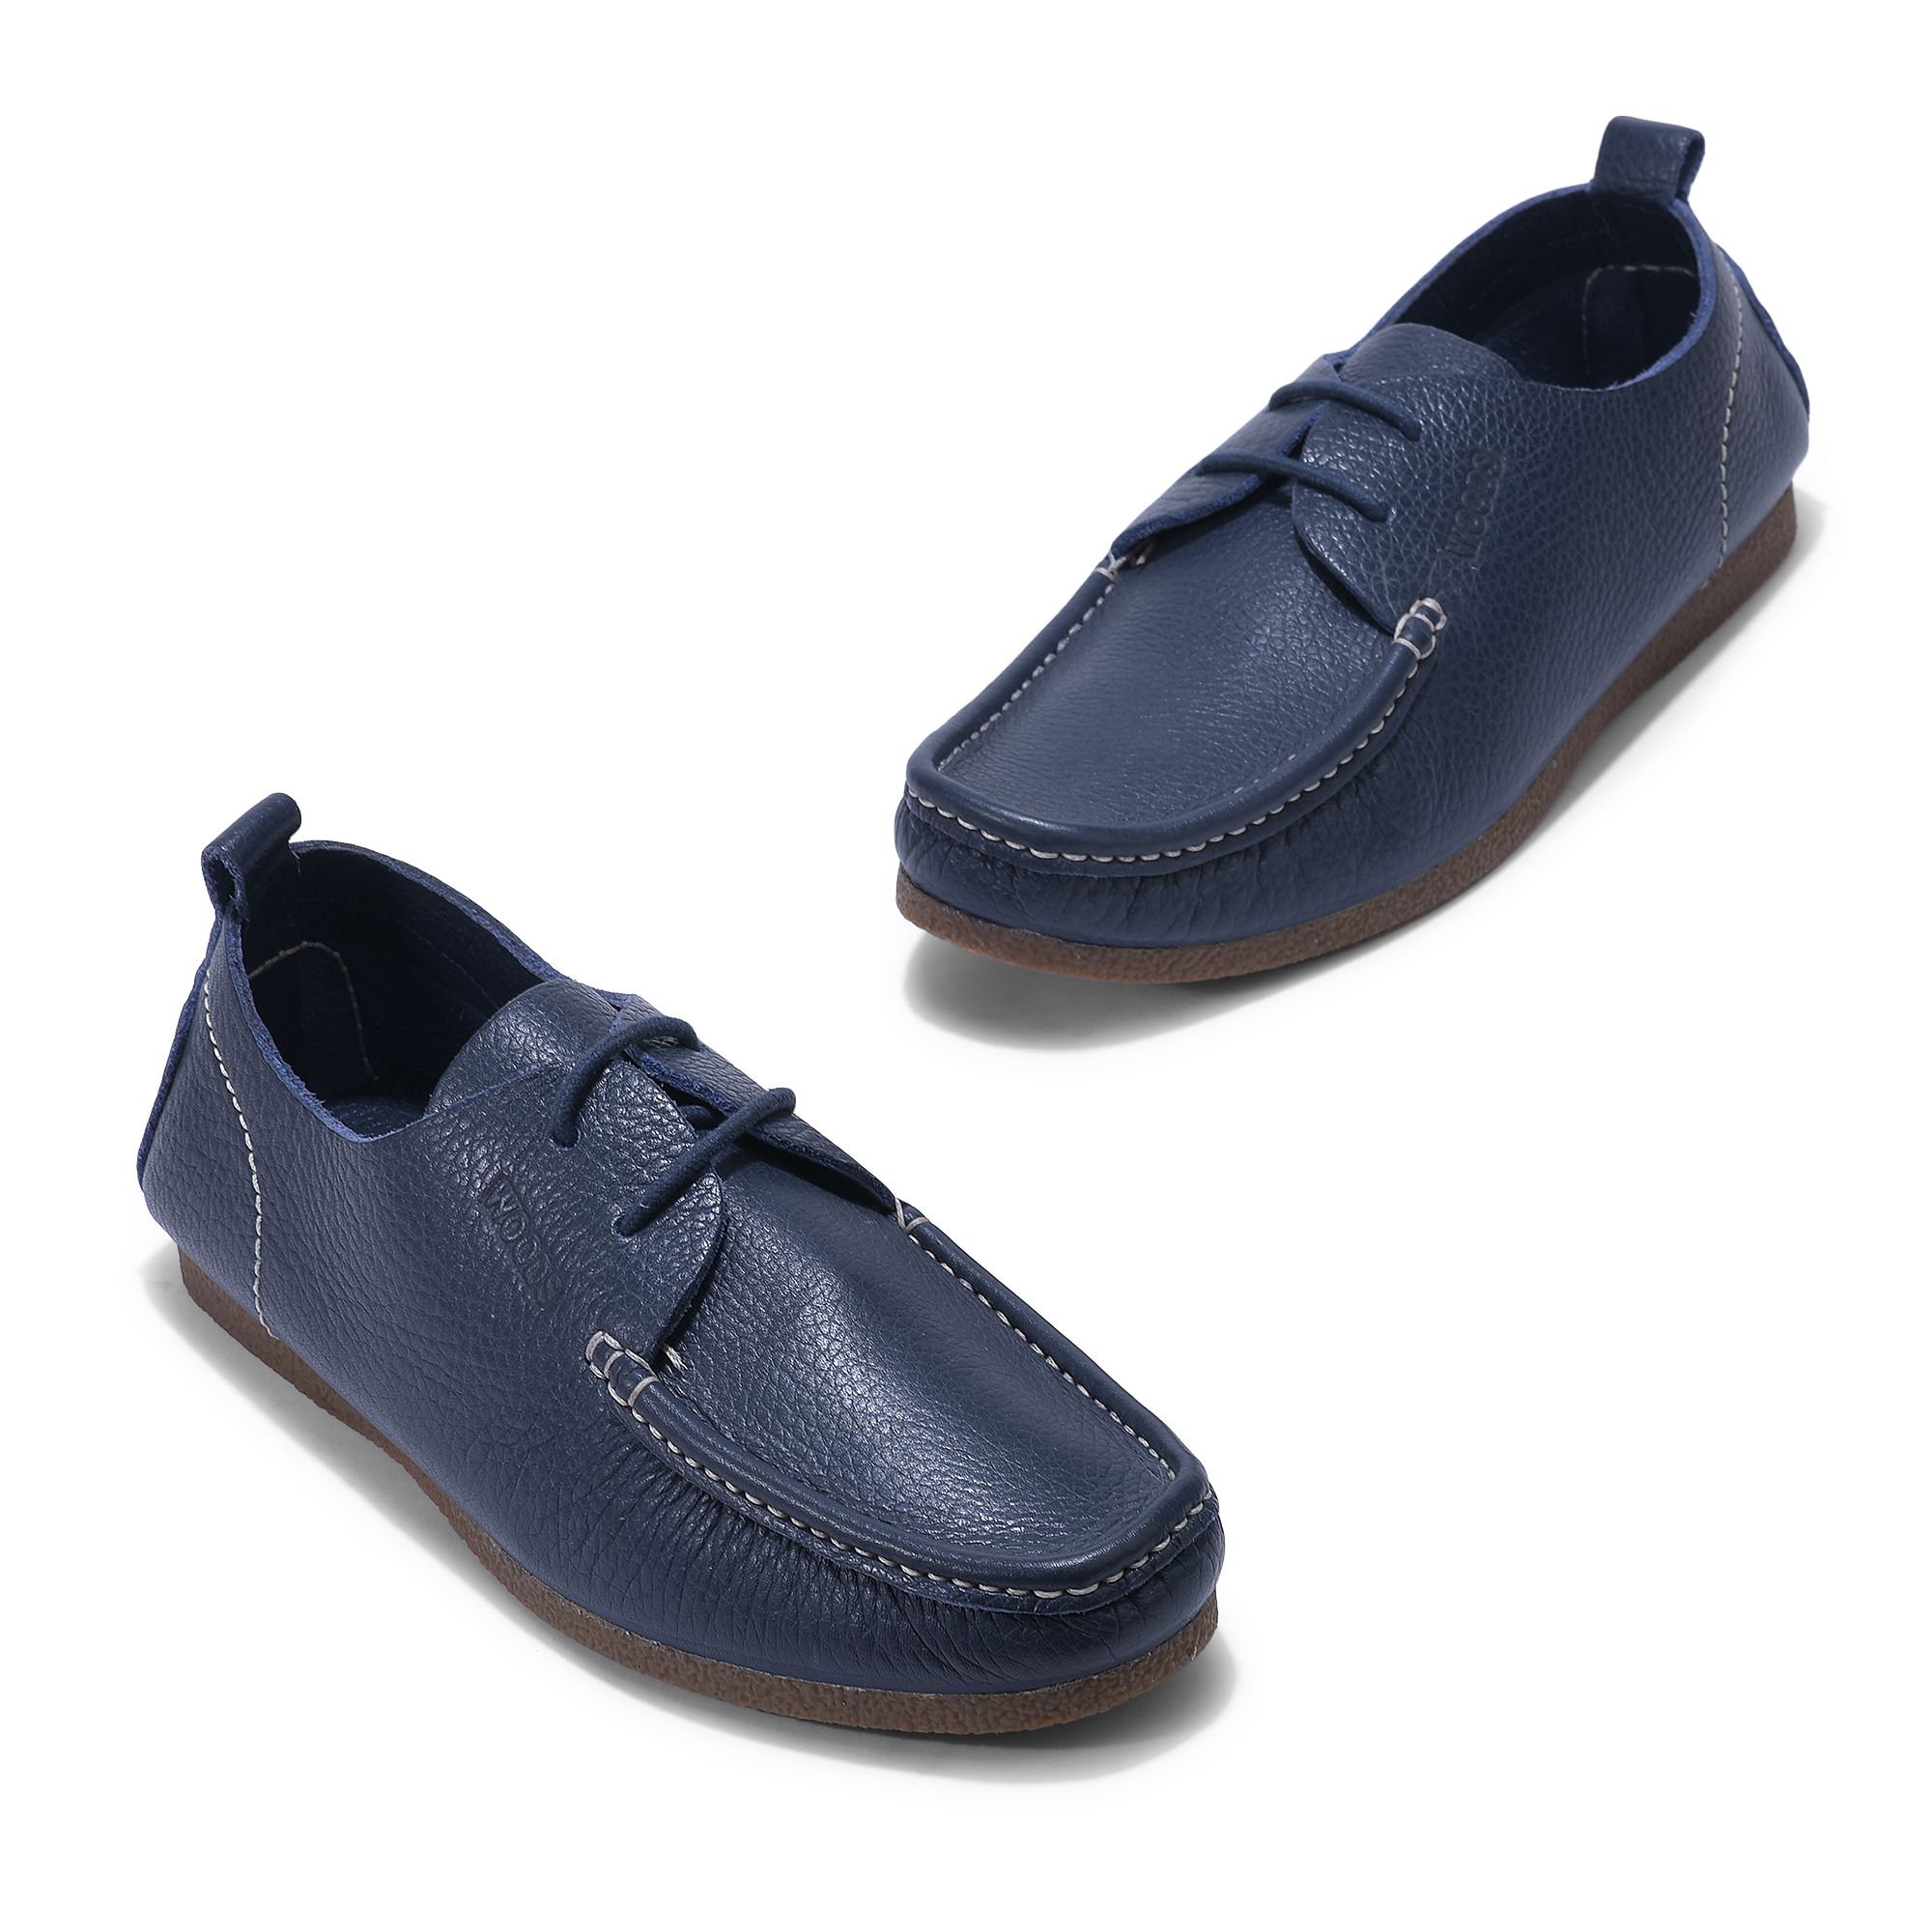 Blue casual shoes for men